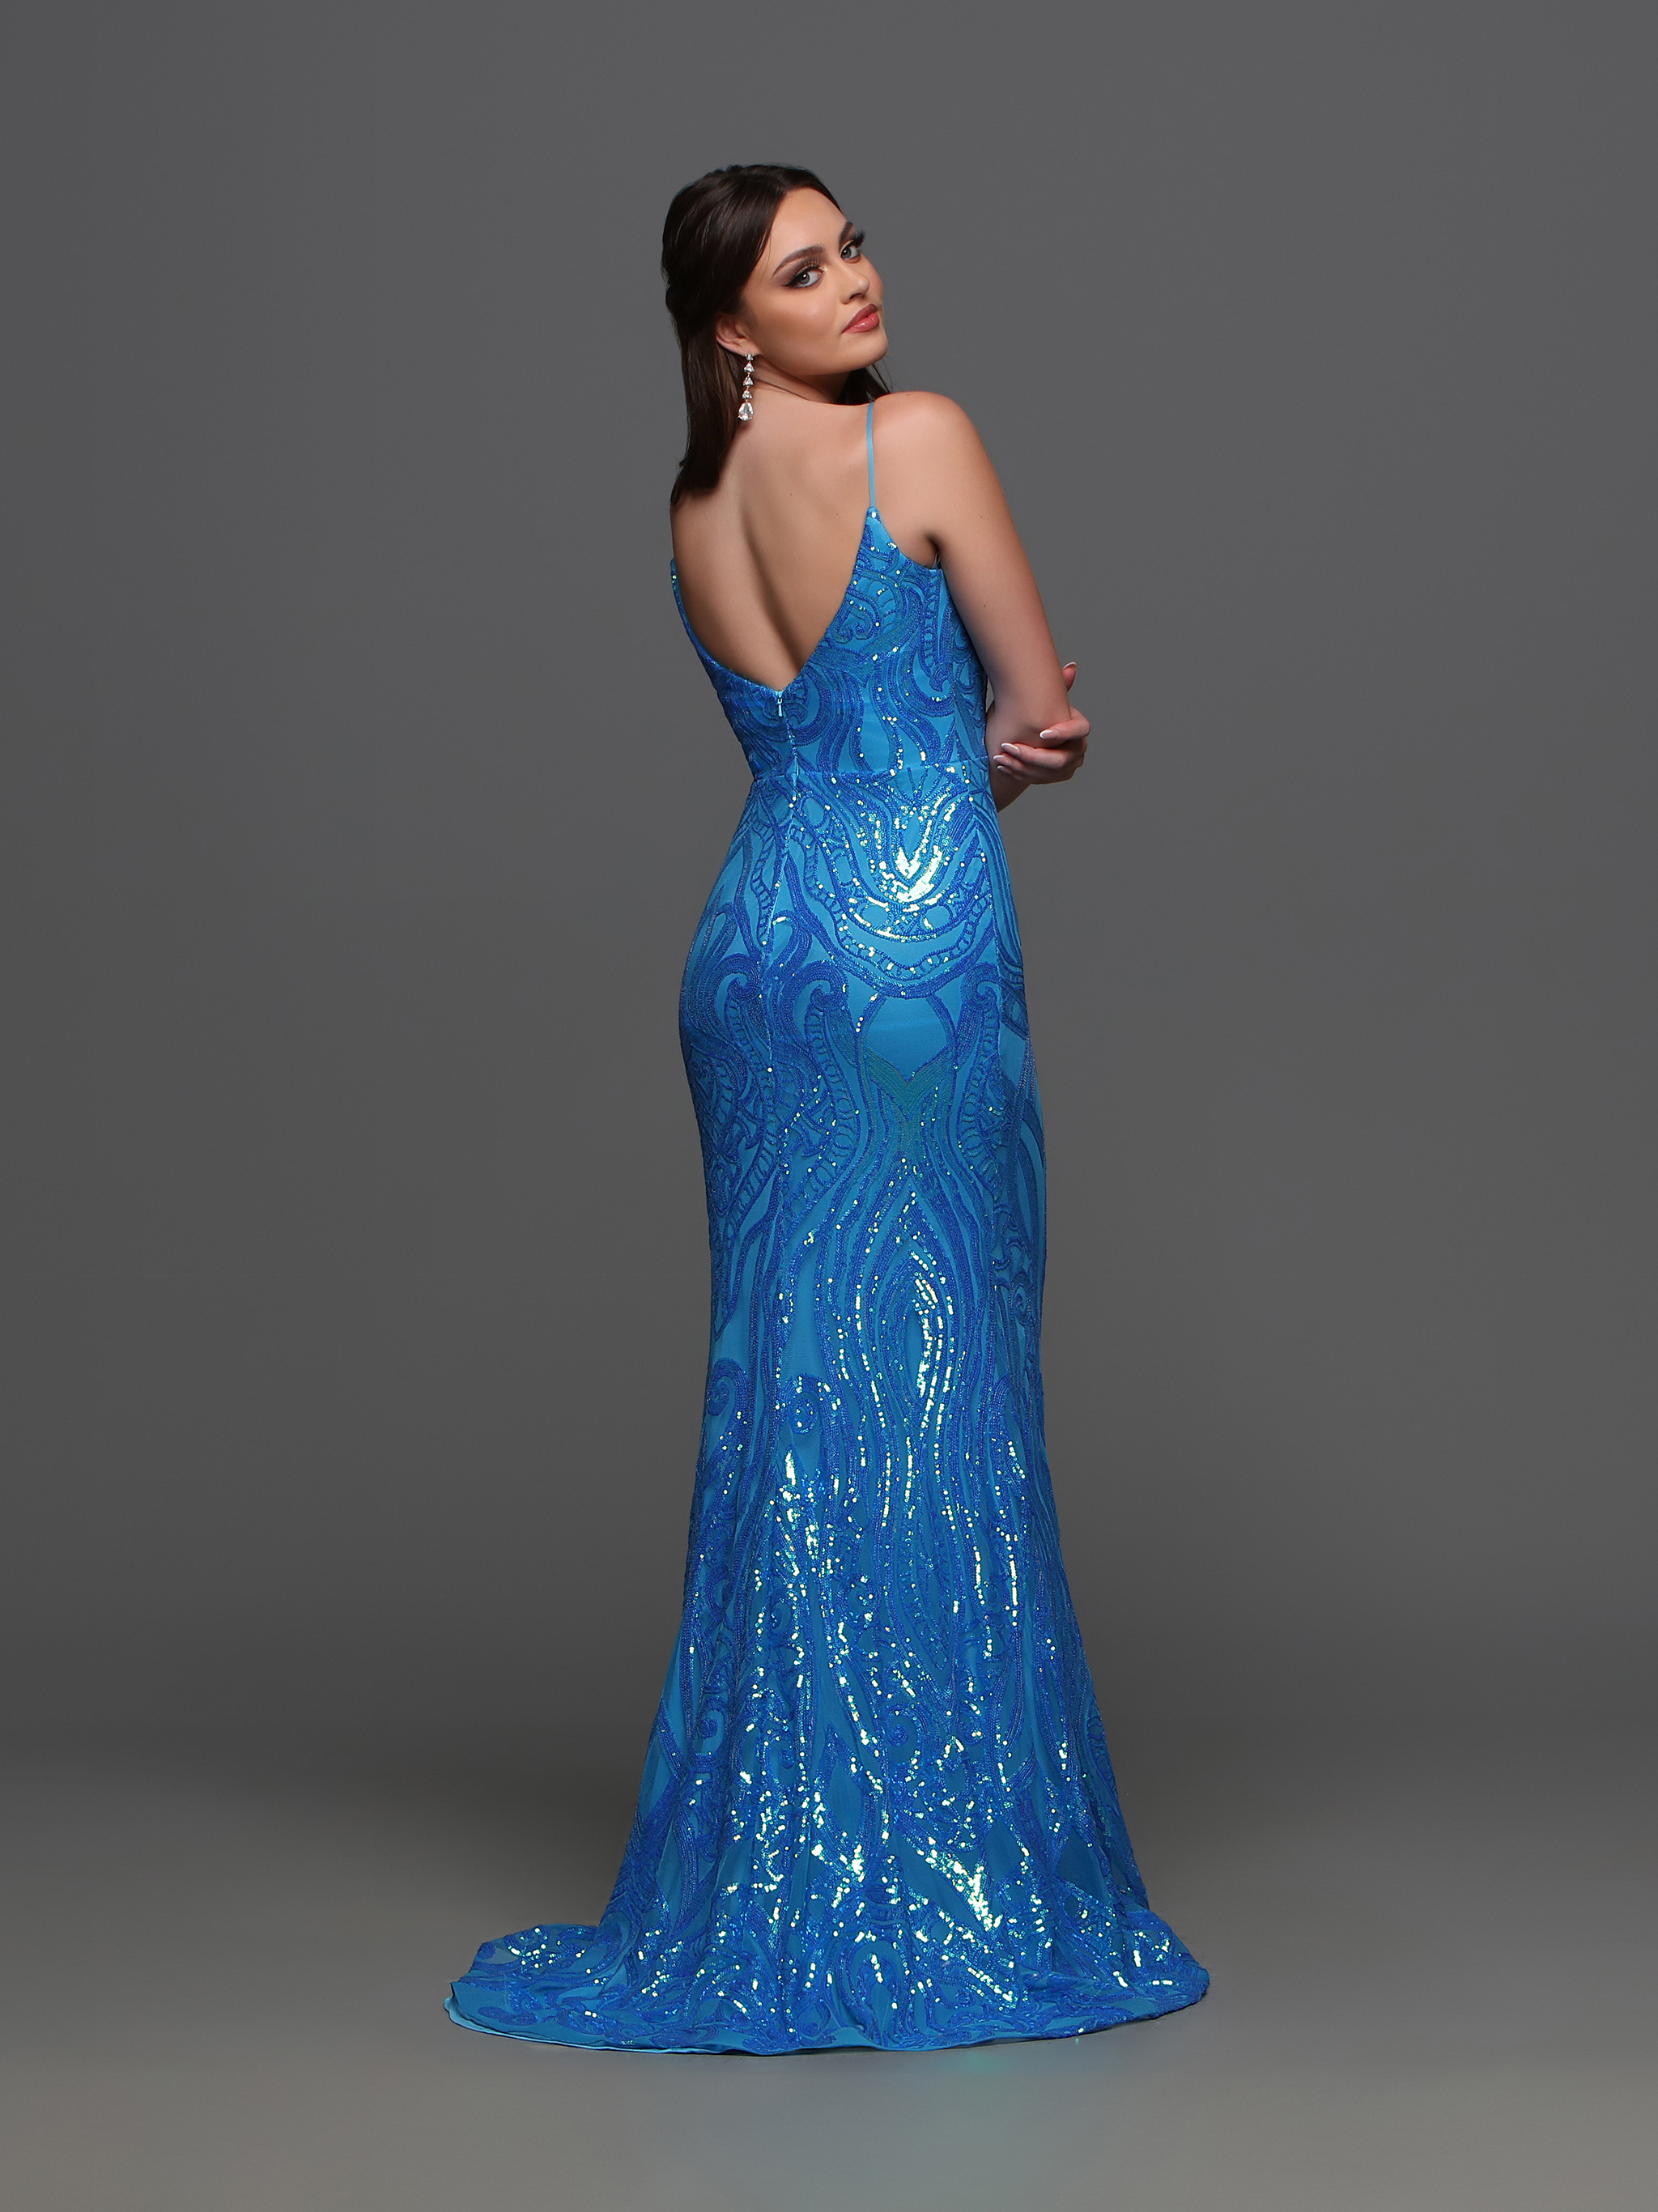 Image showing back view of style #72313